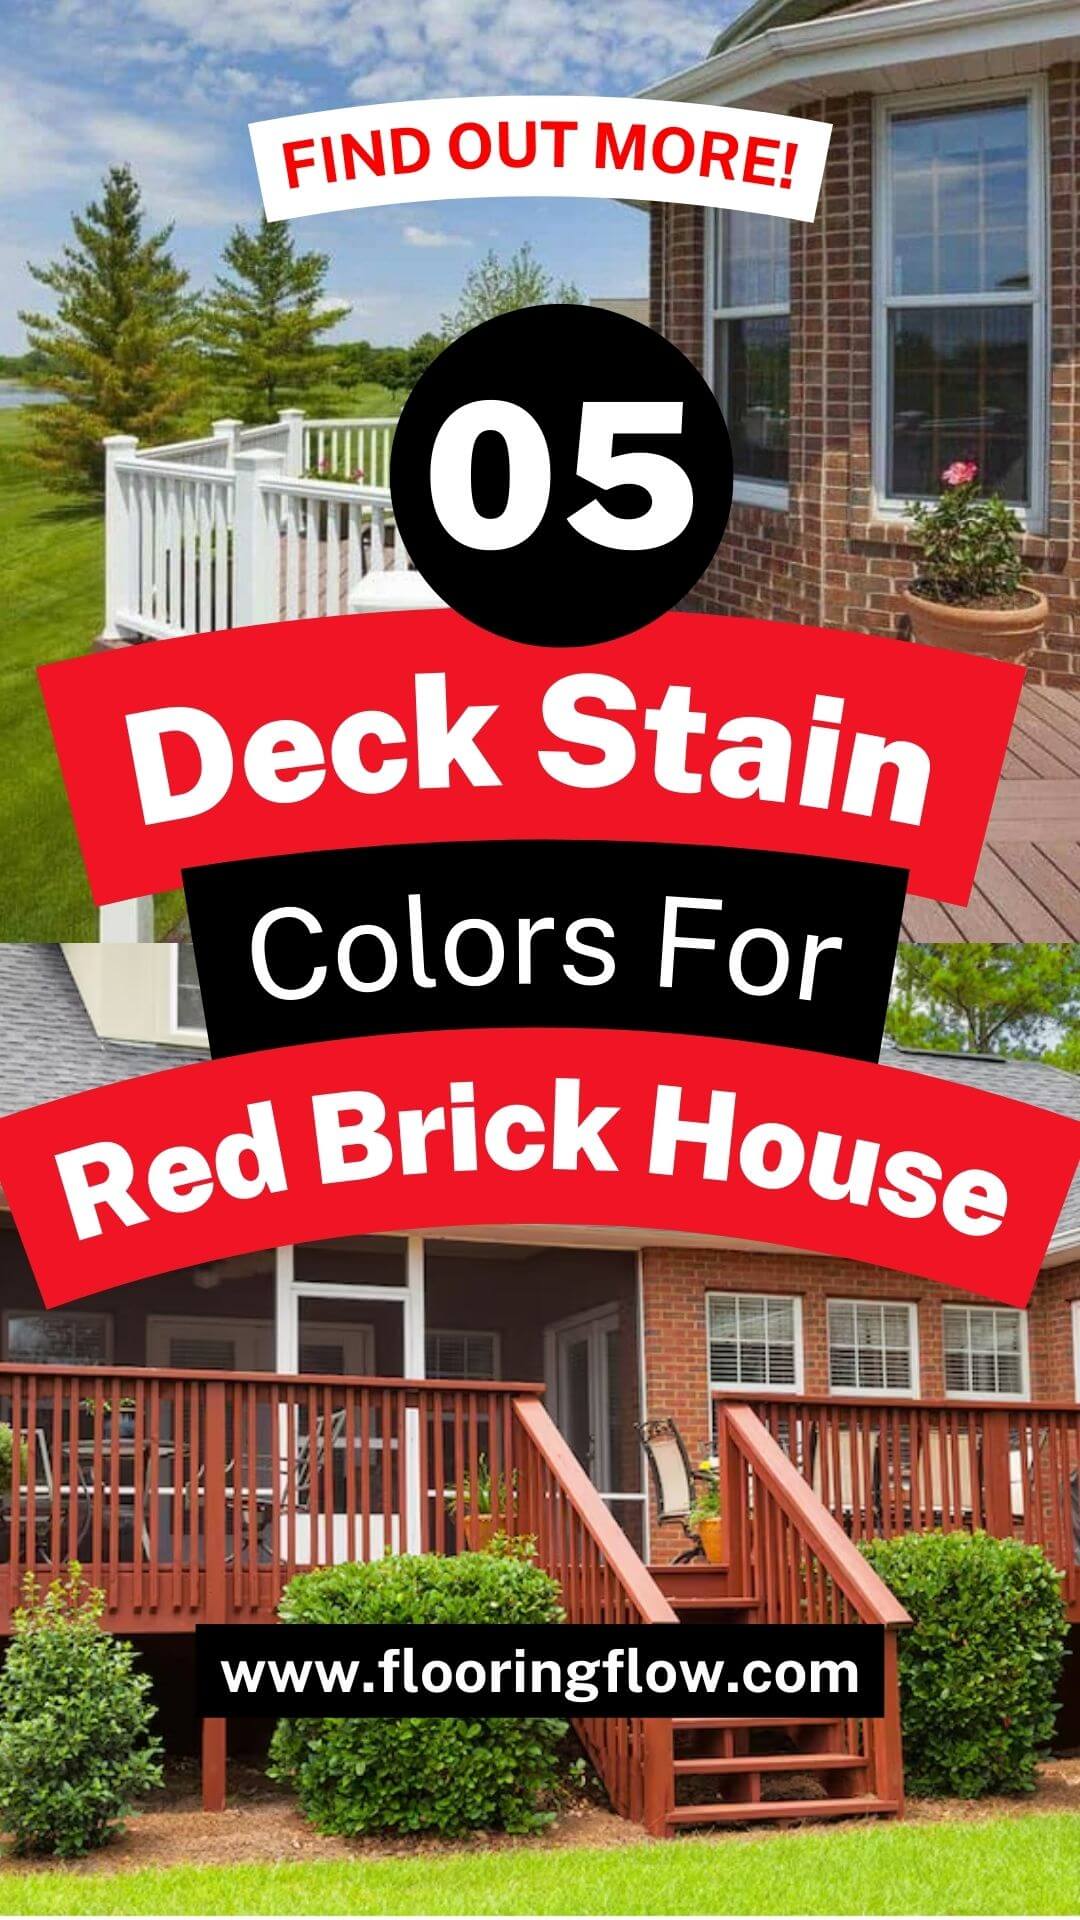 Deck Stain Colors For Red Brick House